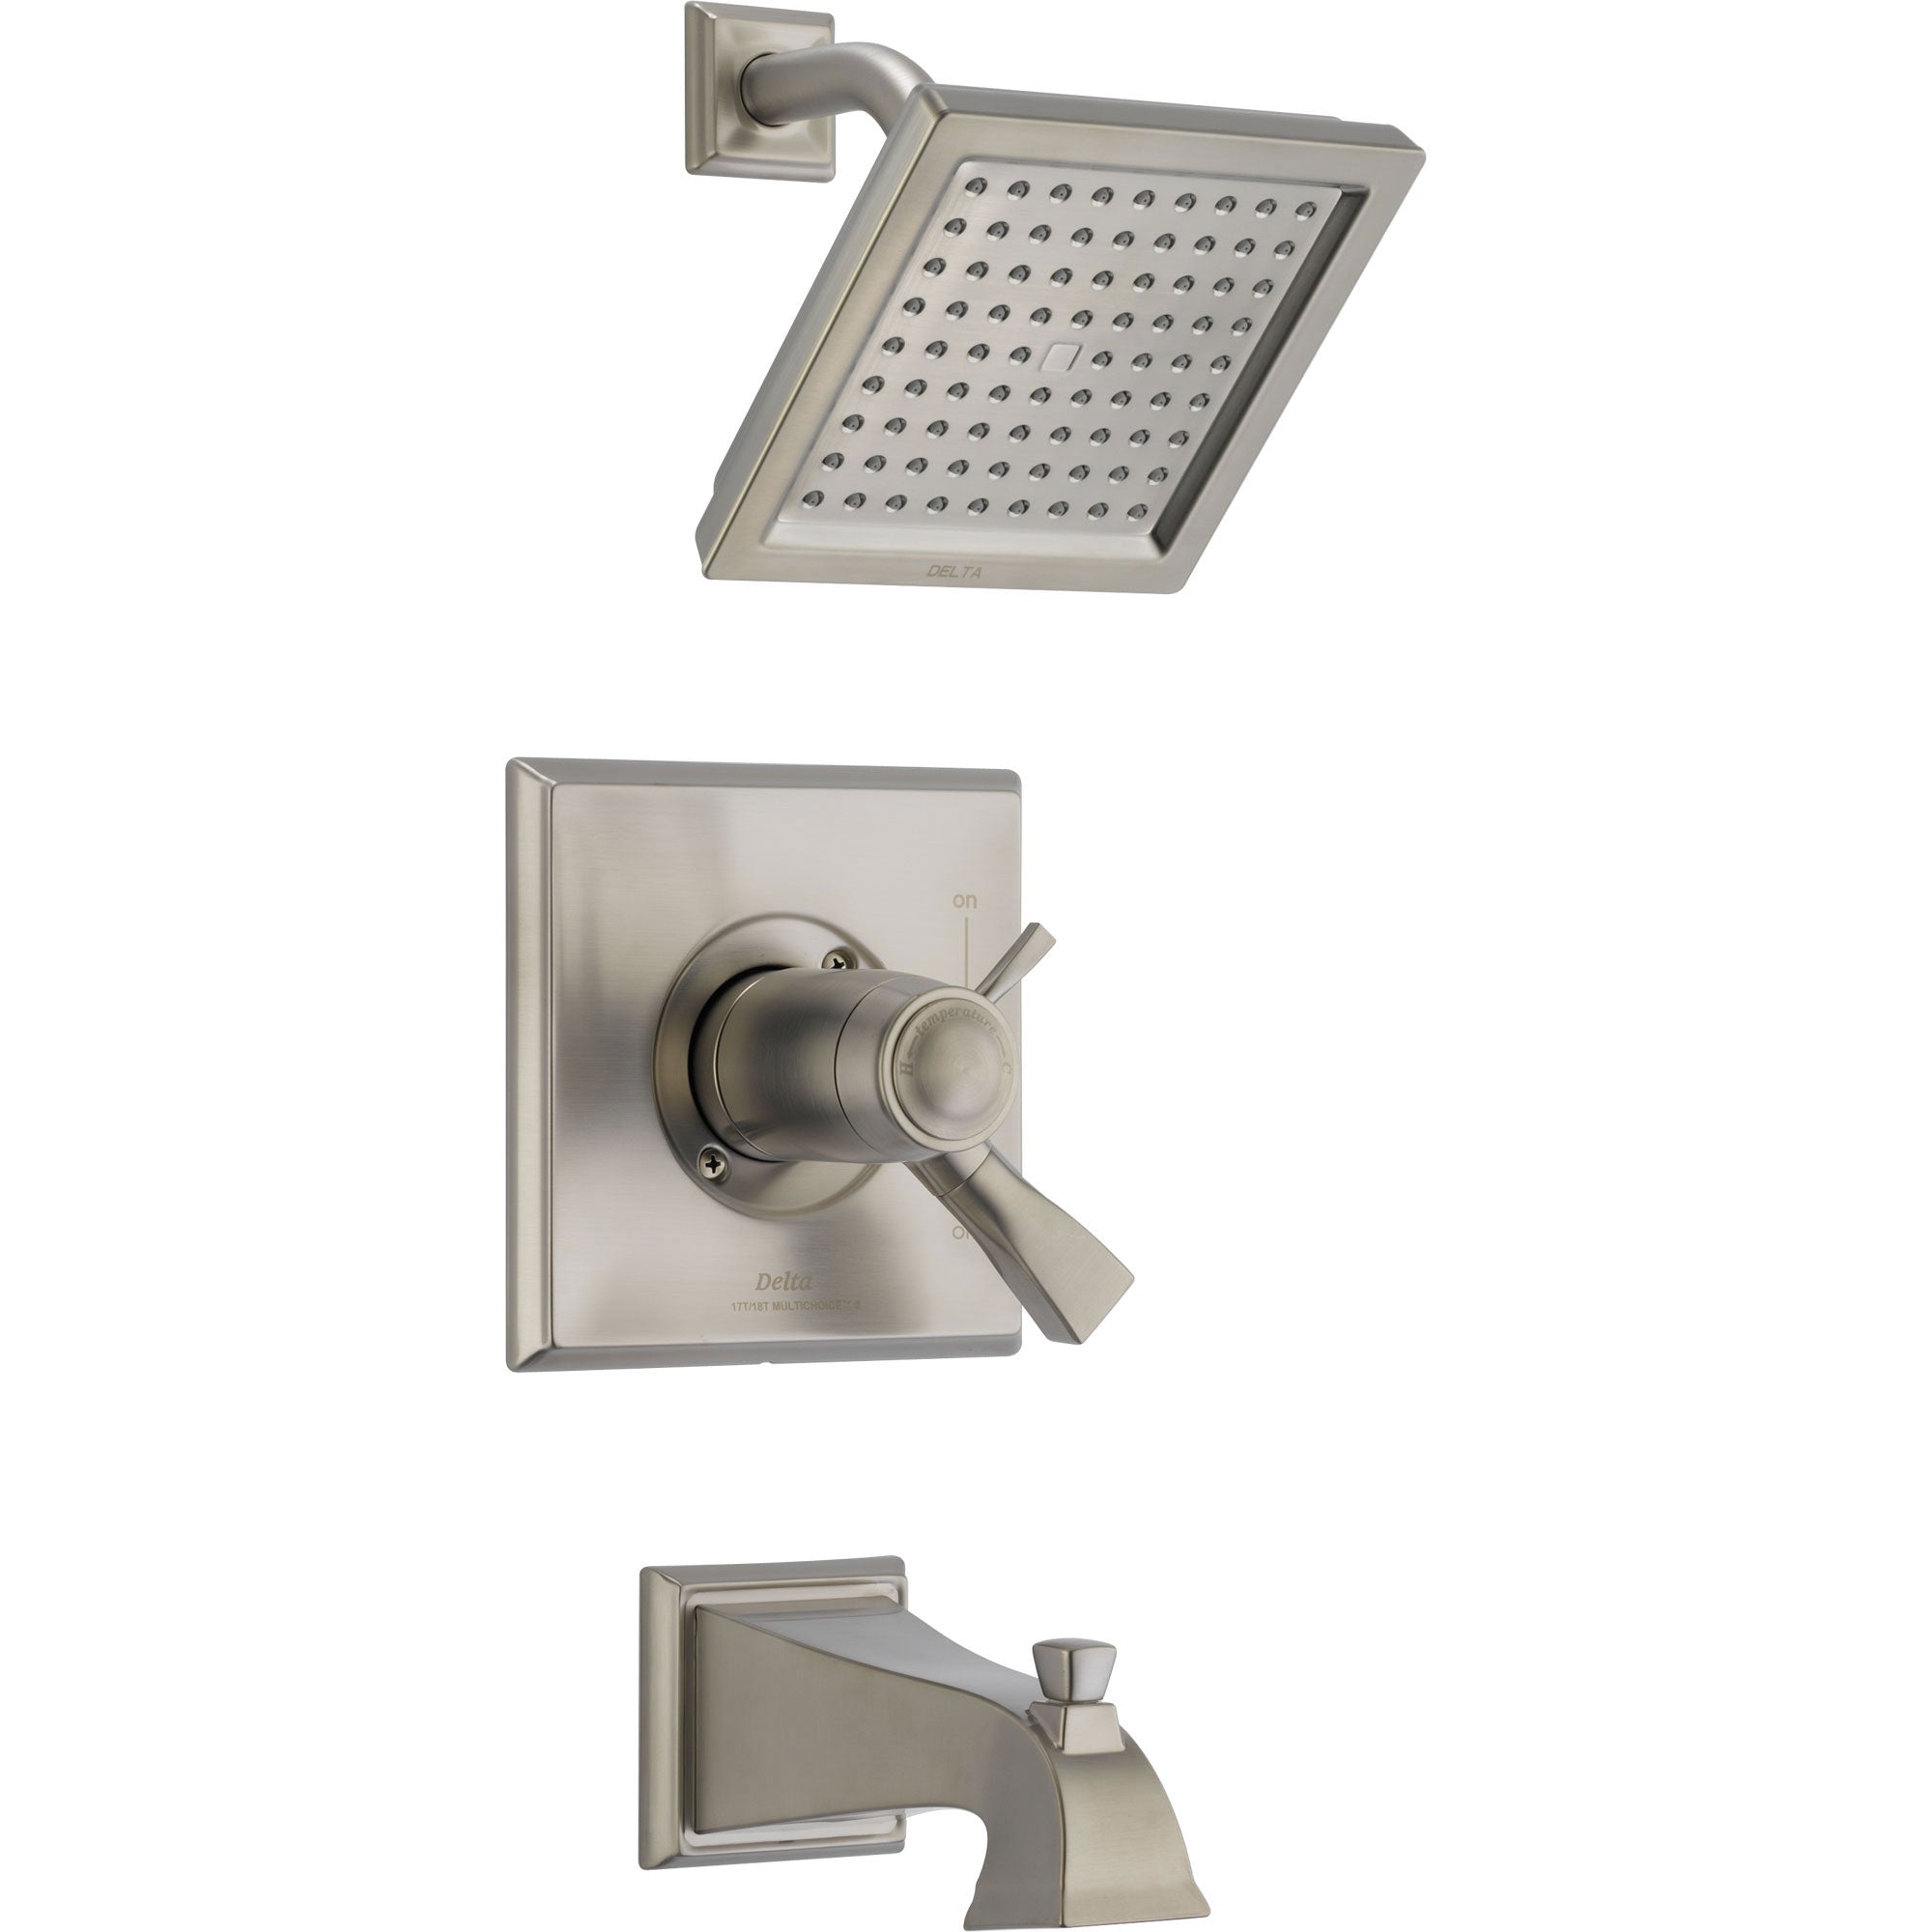 Delta Dryden Thermostatic Stainless Steel Finish Tub and Shower Trim 457101